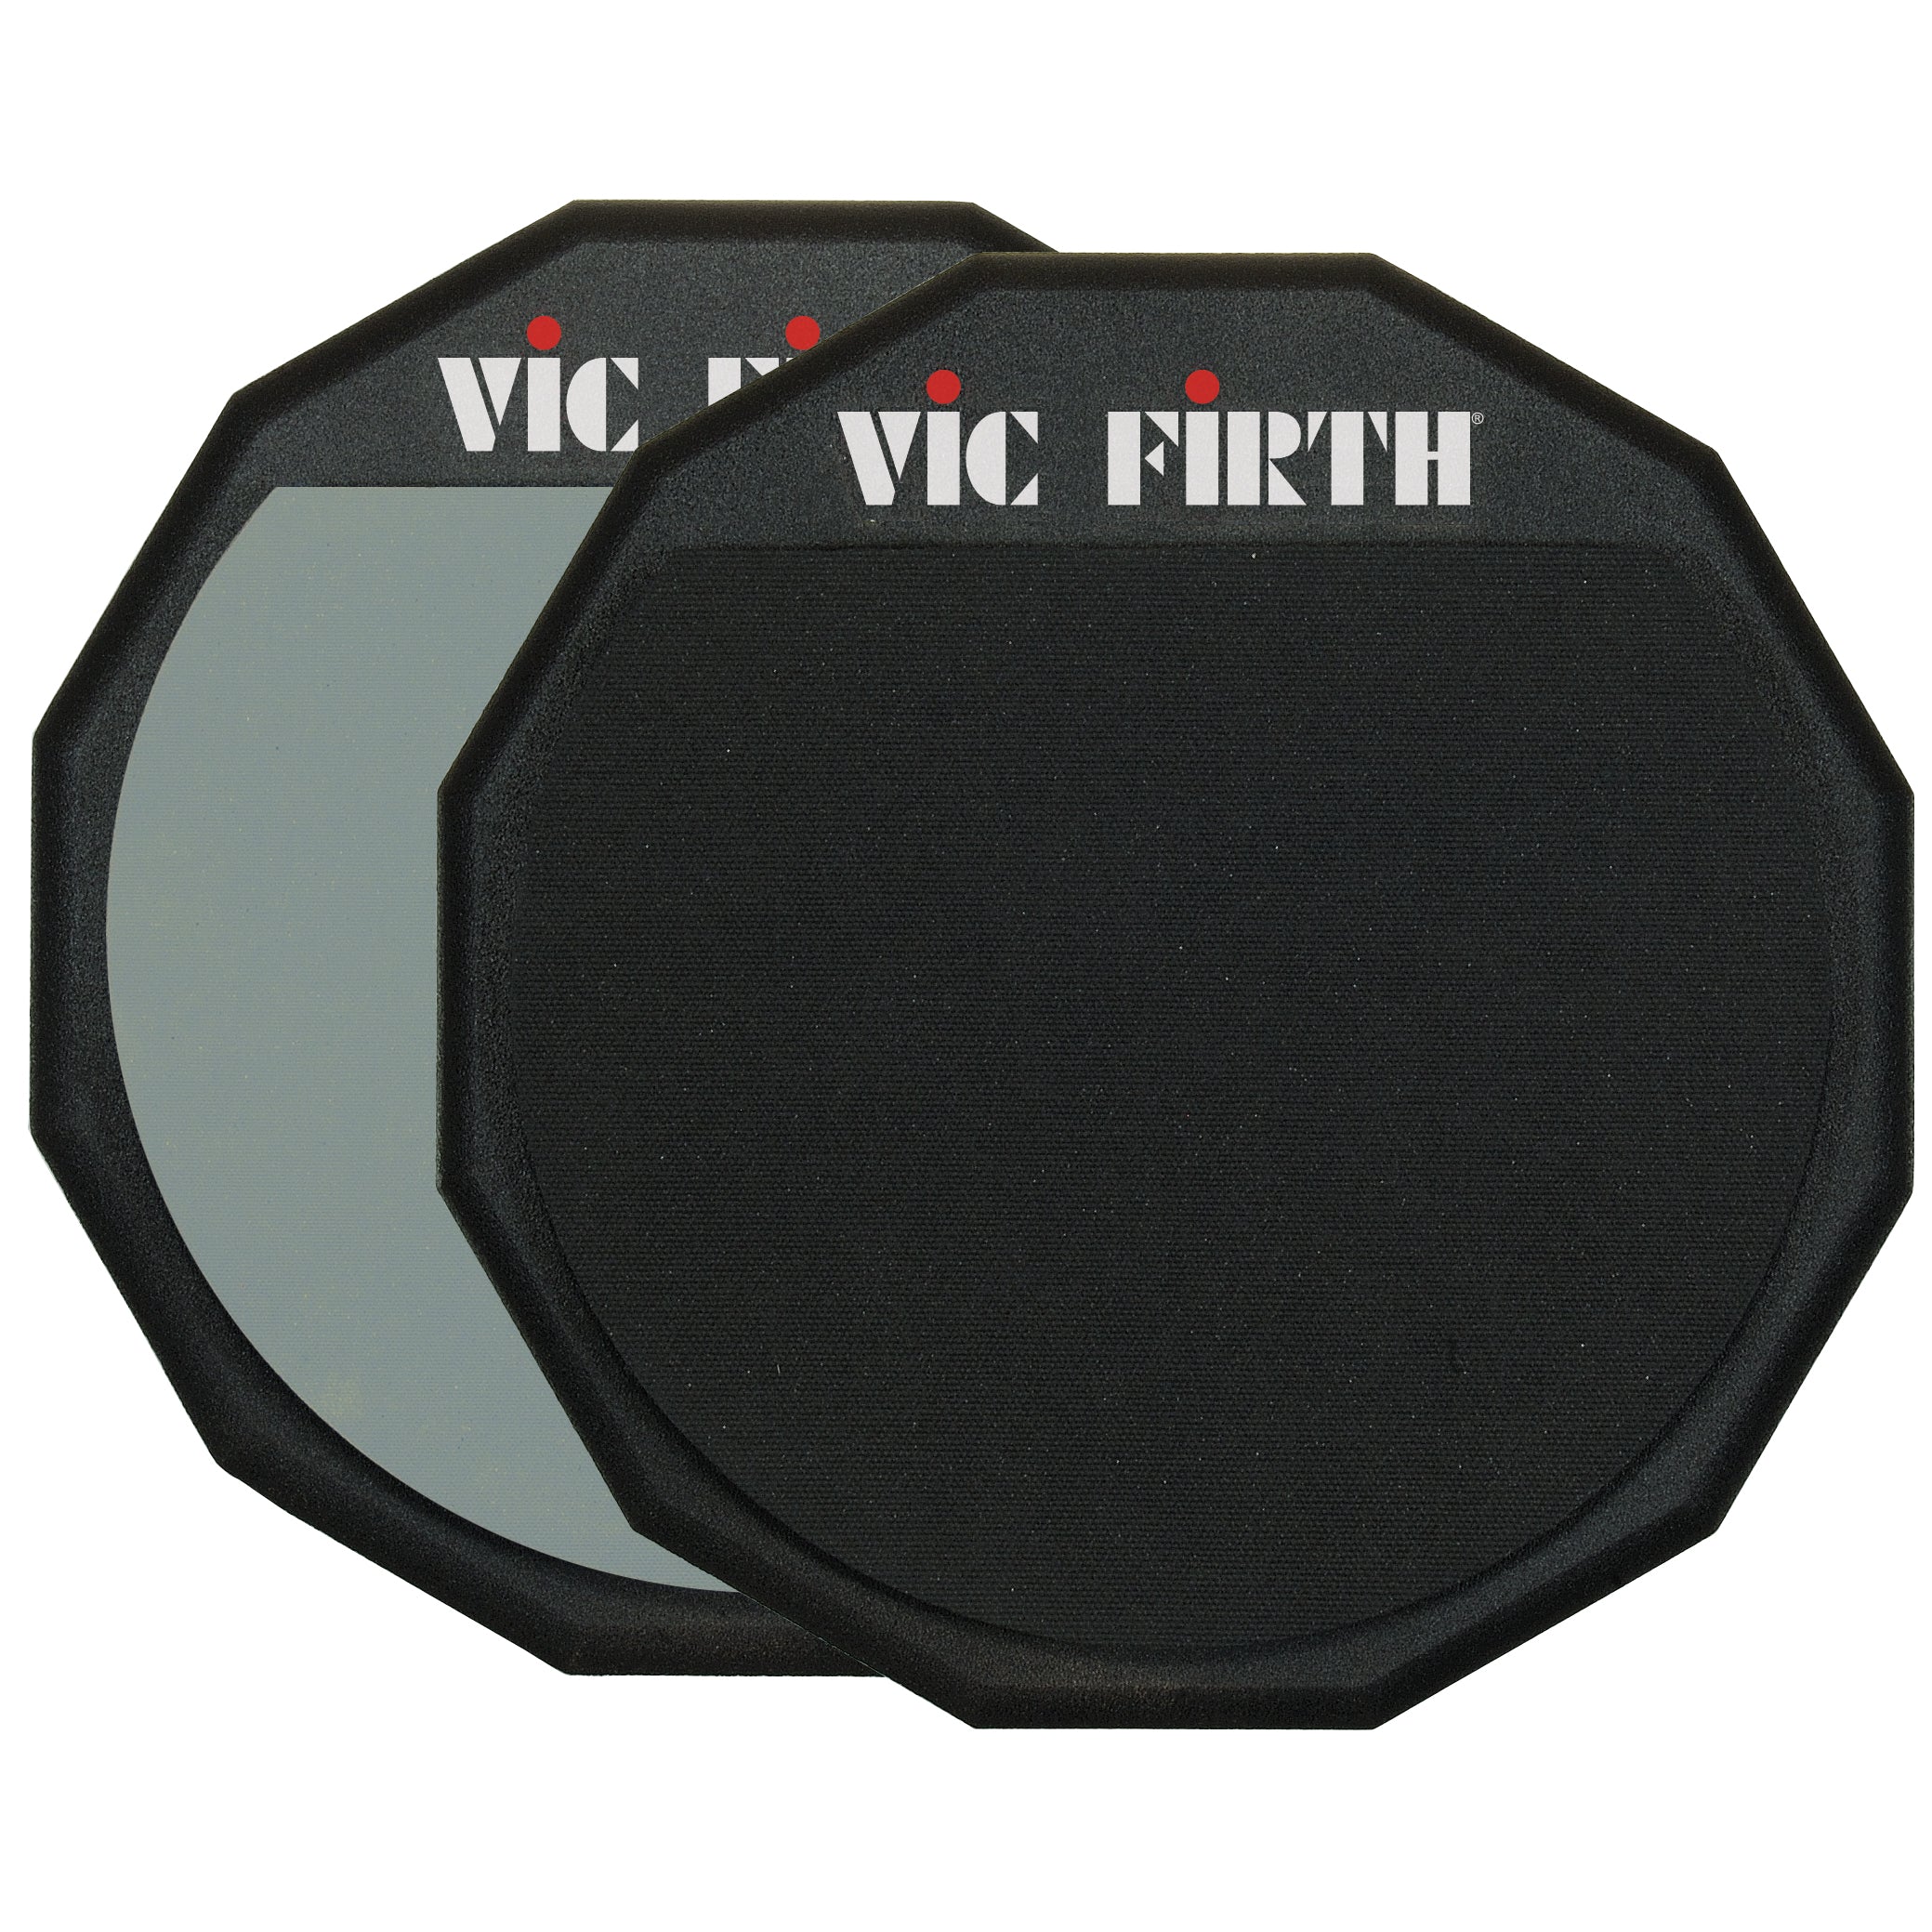 Vic Firth Double-Sided 6" Practice Pad